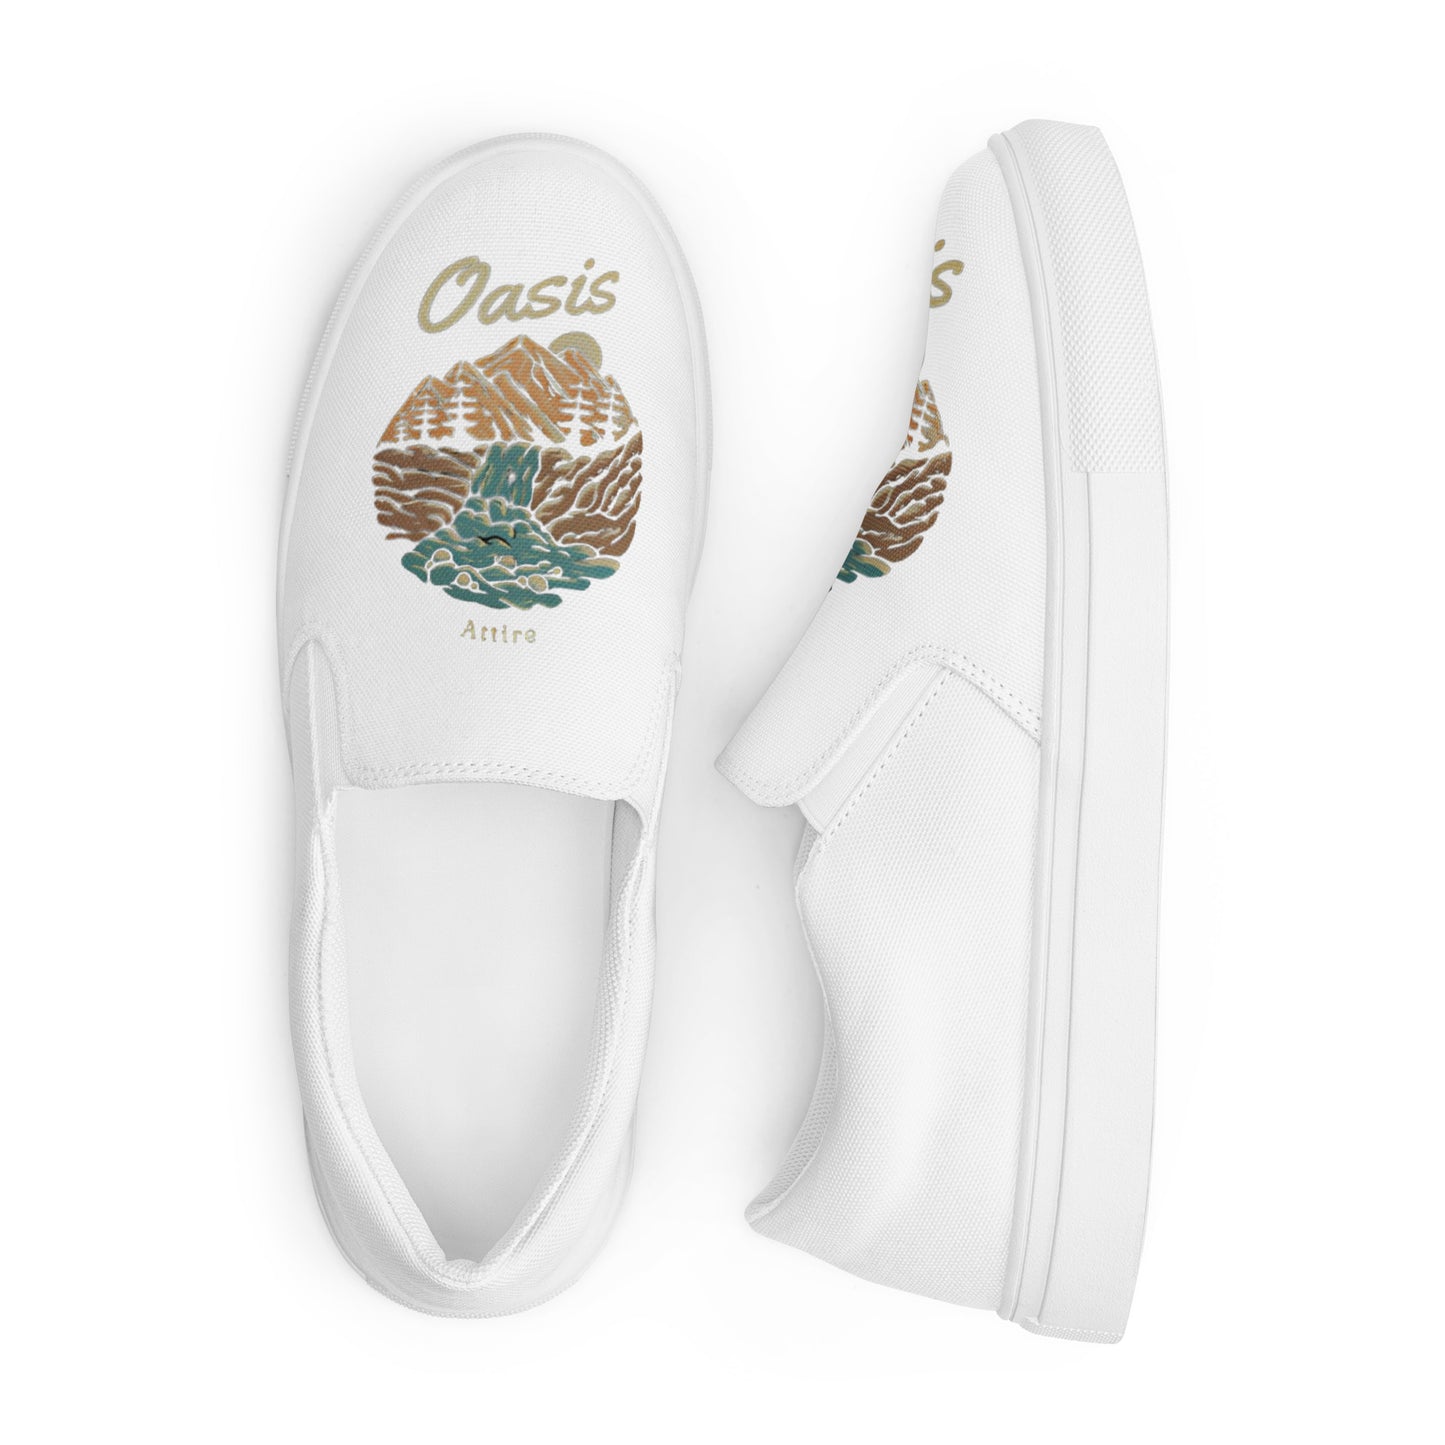 Oasis Women’s slip-on canvas shoes